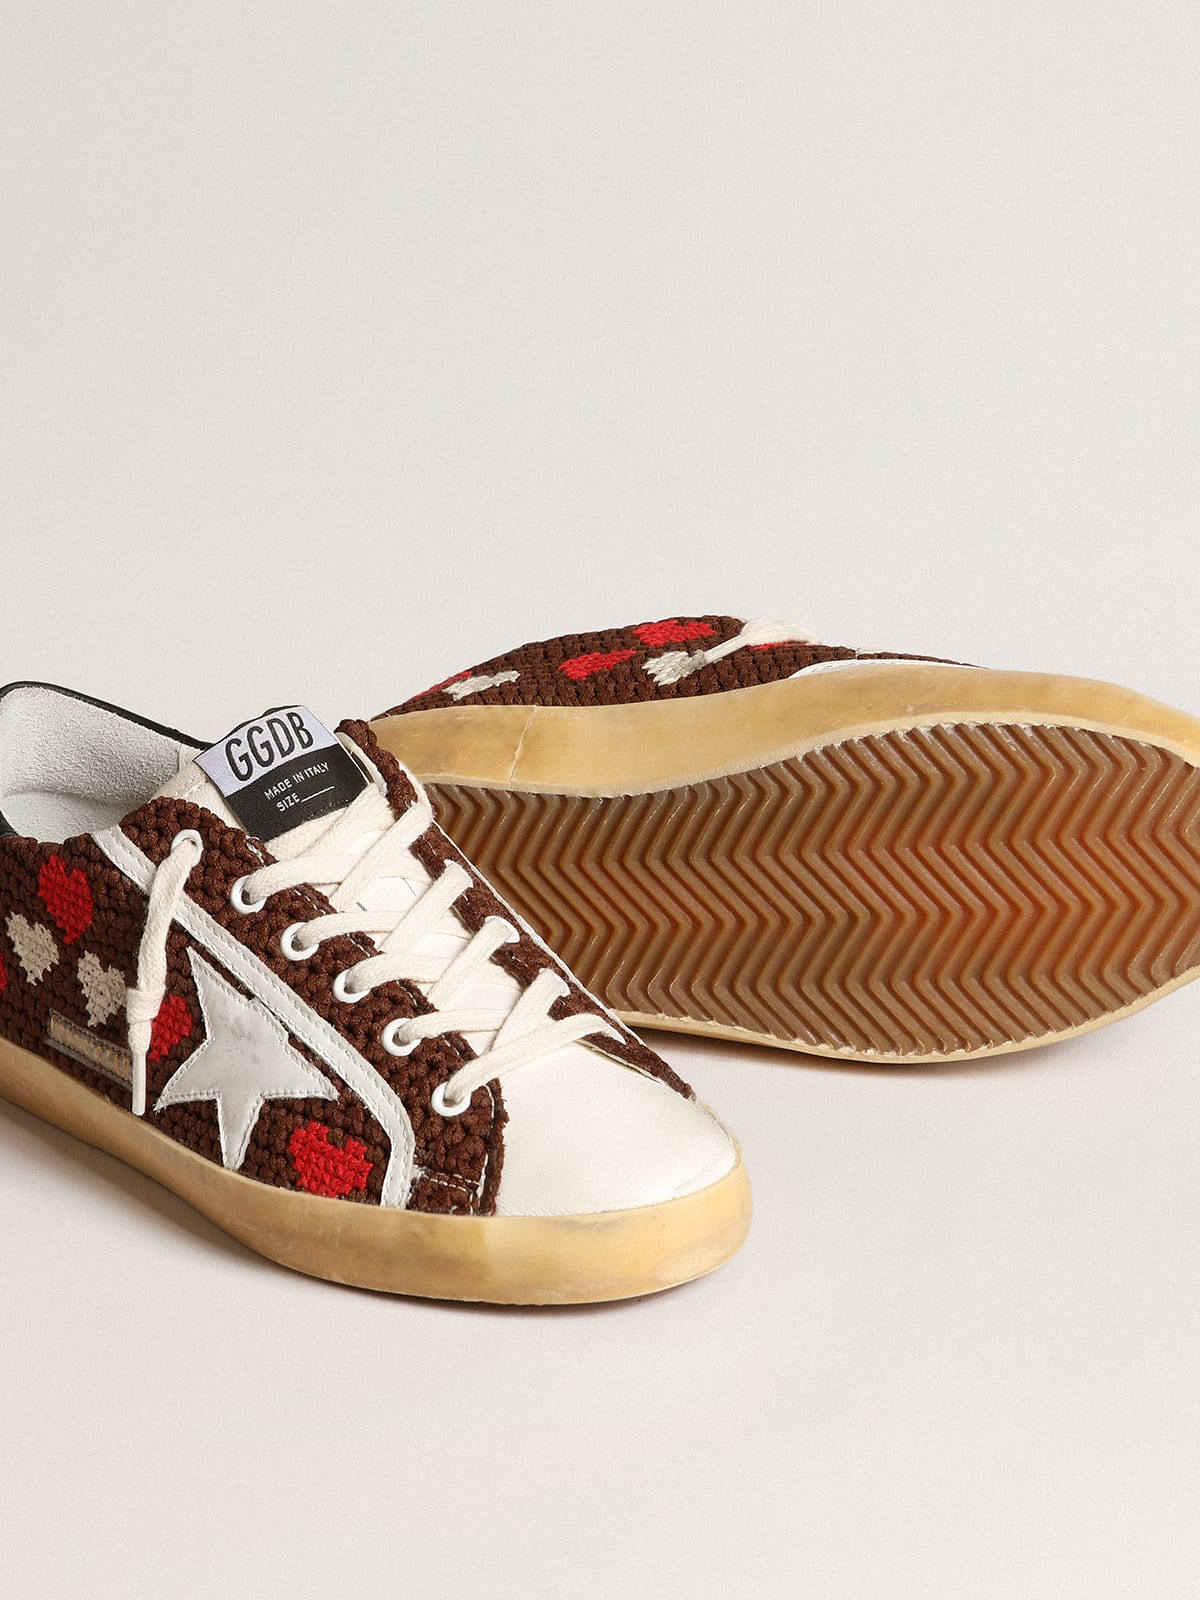 Golden Goose - Super-Star LTD in brown crochet with embroidered hearts and white star in 